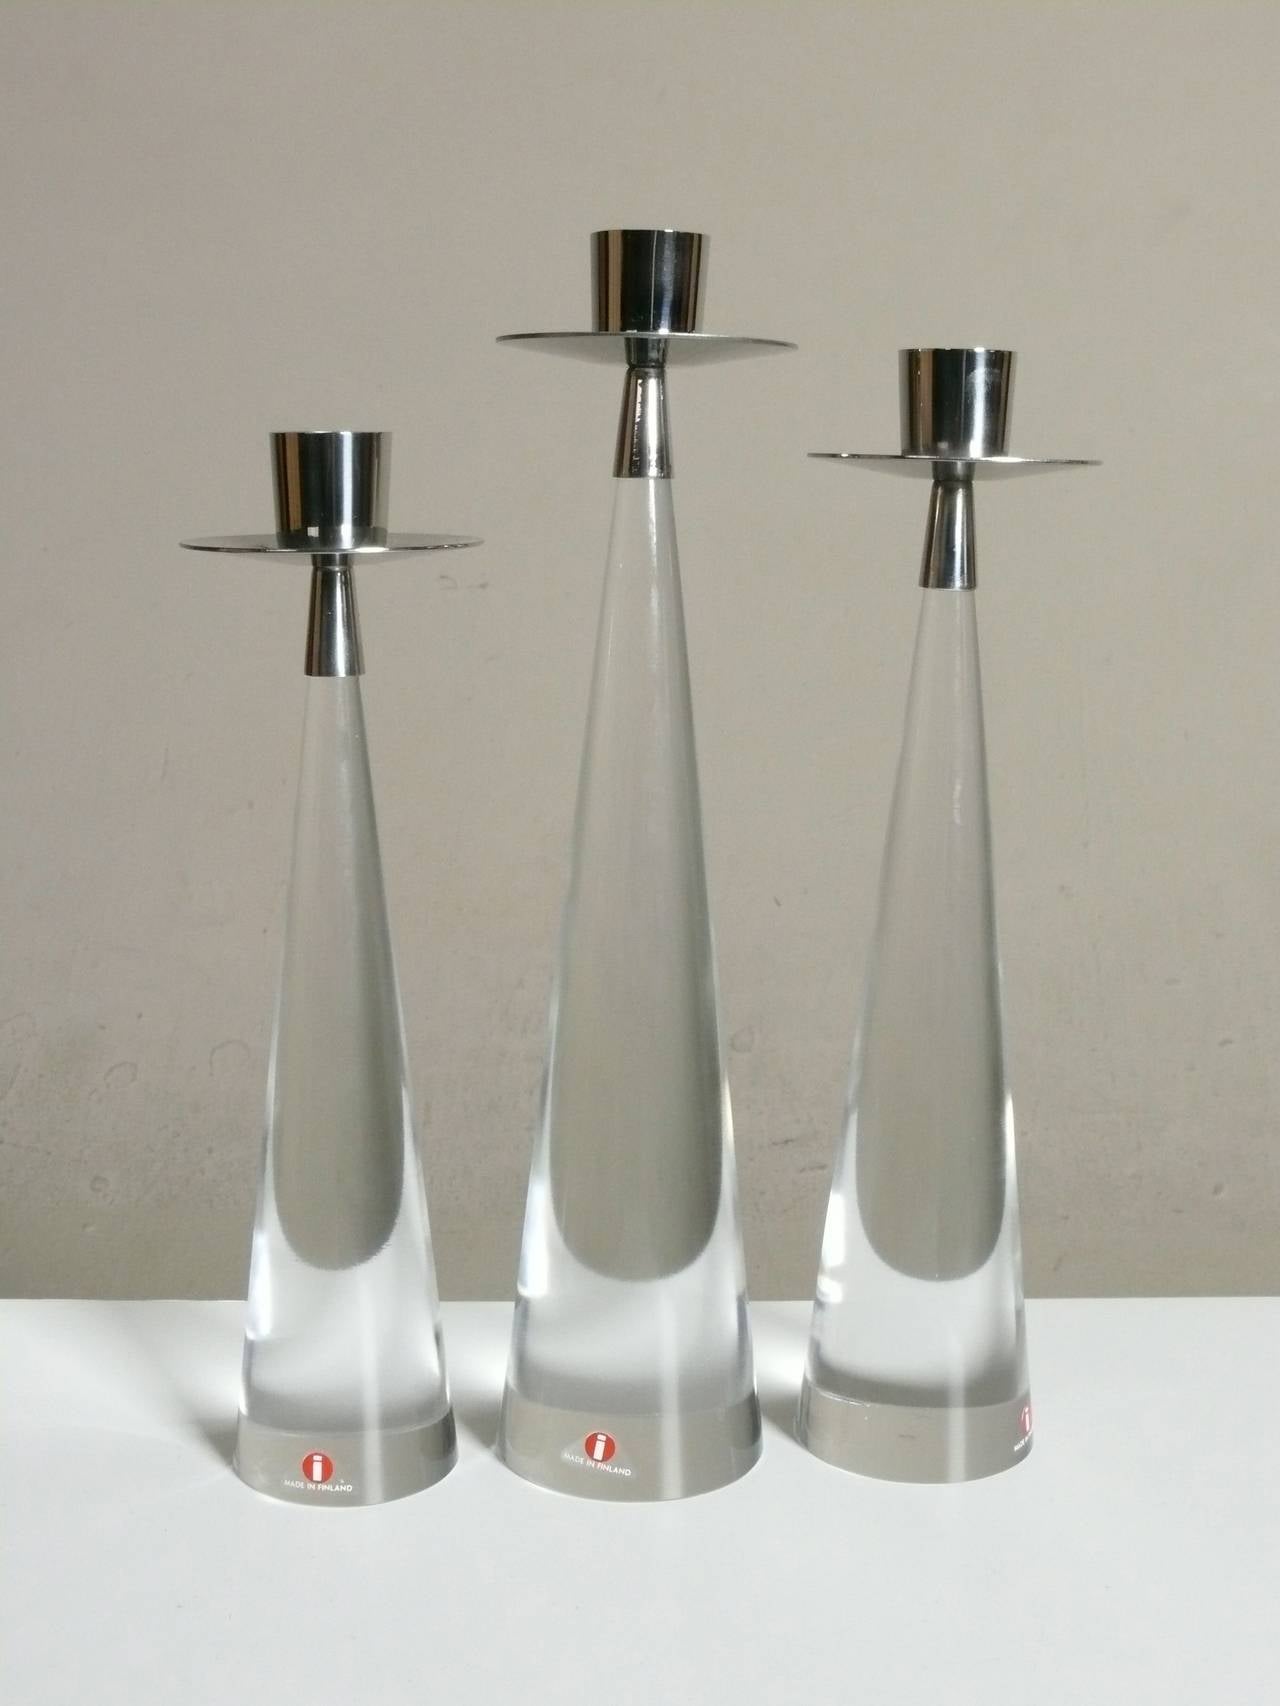 Rare modernist trio of candle holders by Tapio Wirkkala for Iittala in glass and stainless, each retaining its original Iittala label.